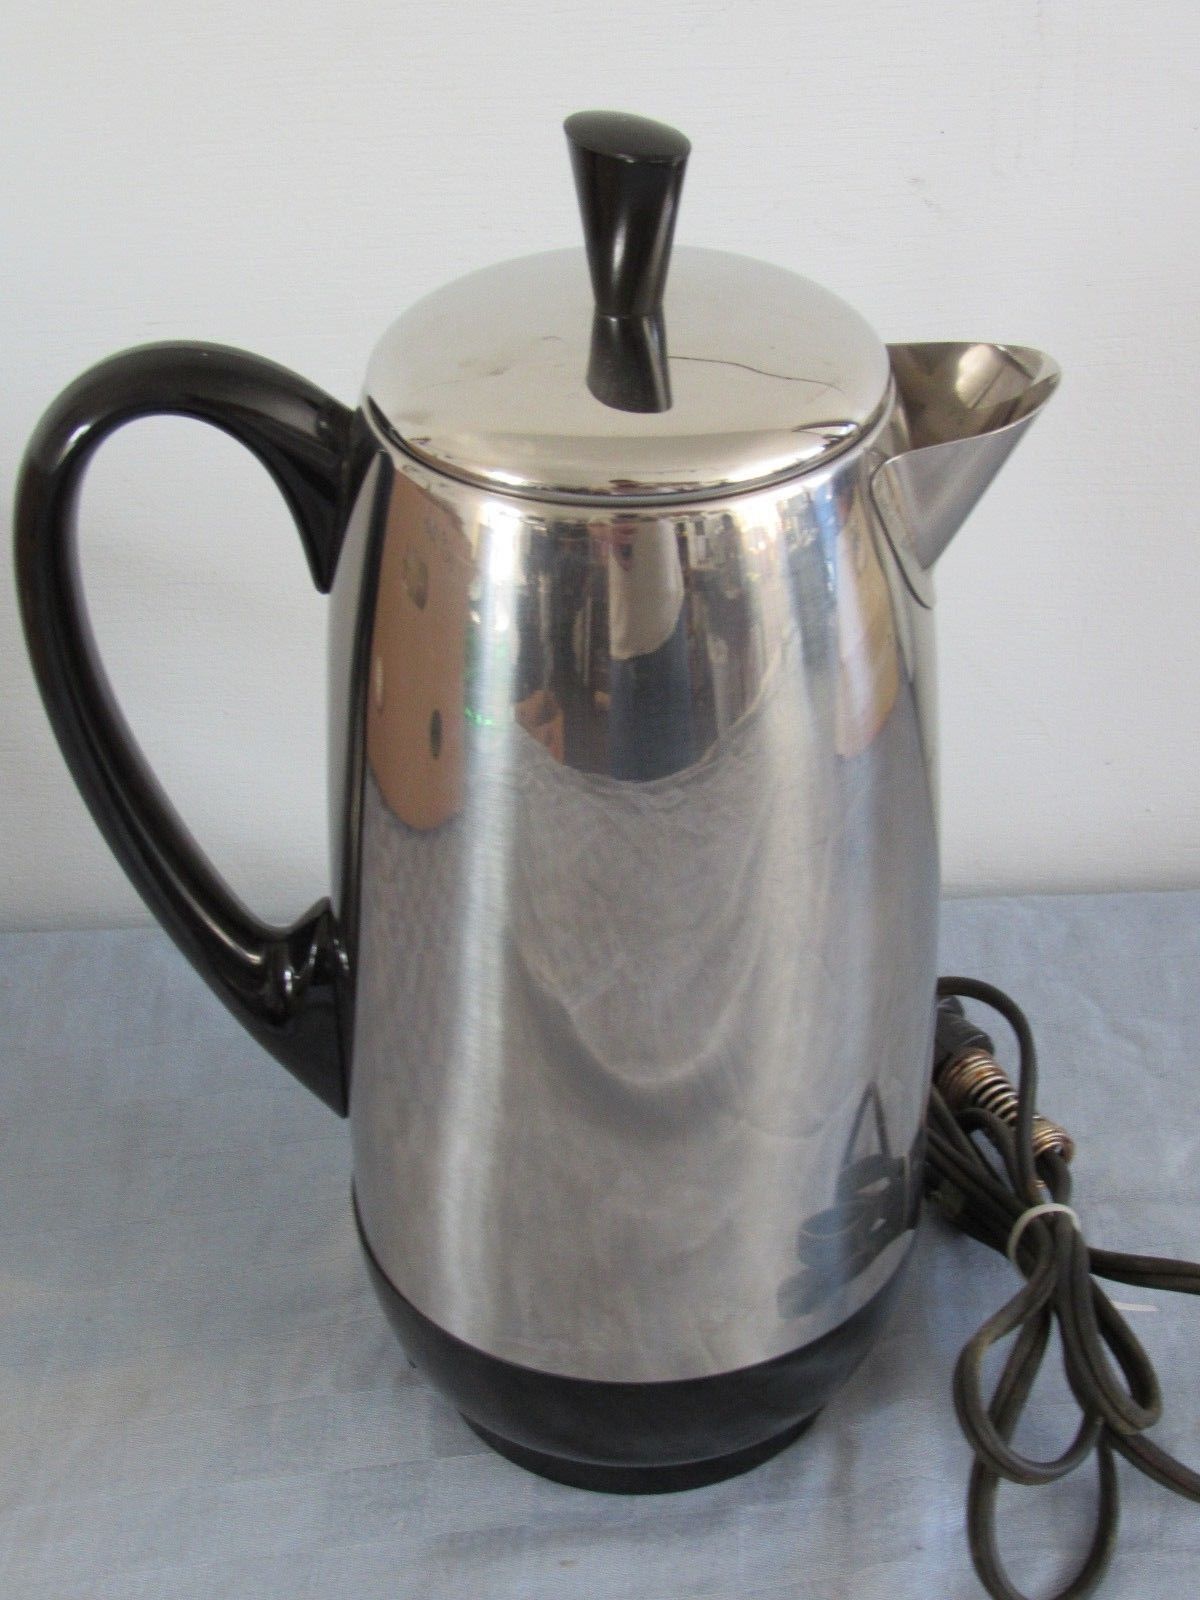 Vintage Farberware Chrome Electric Coffee Pot Made in USA With Cord - eBay